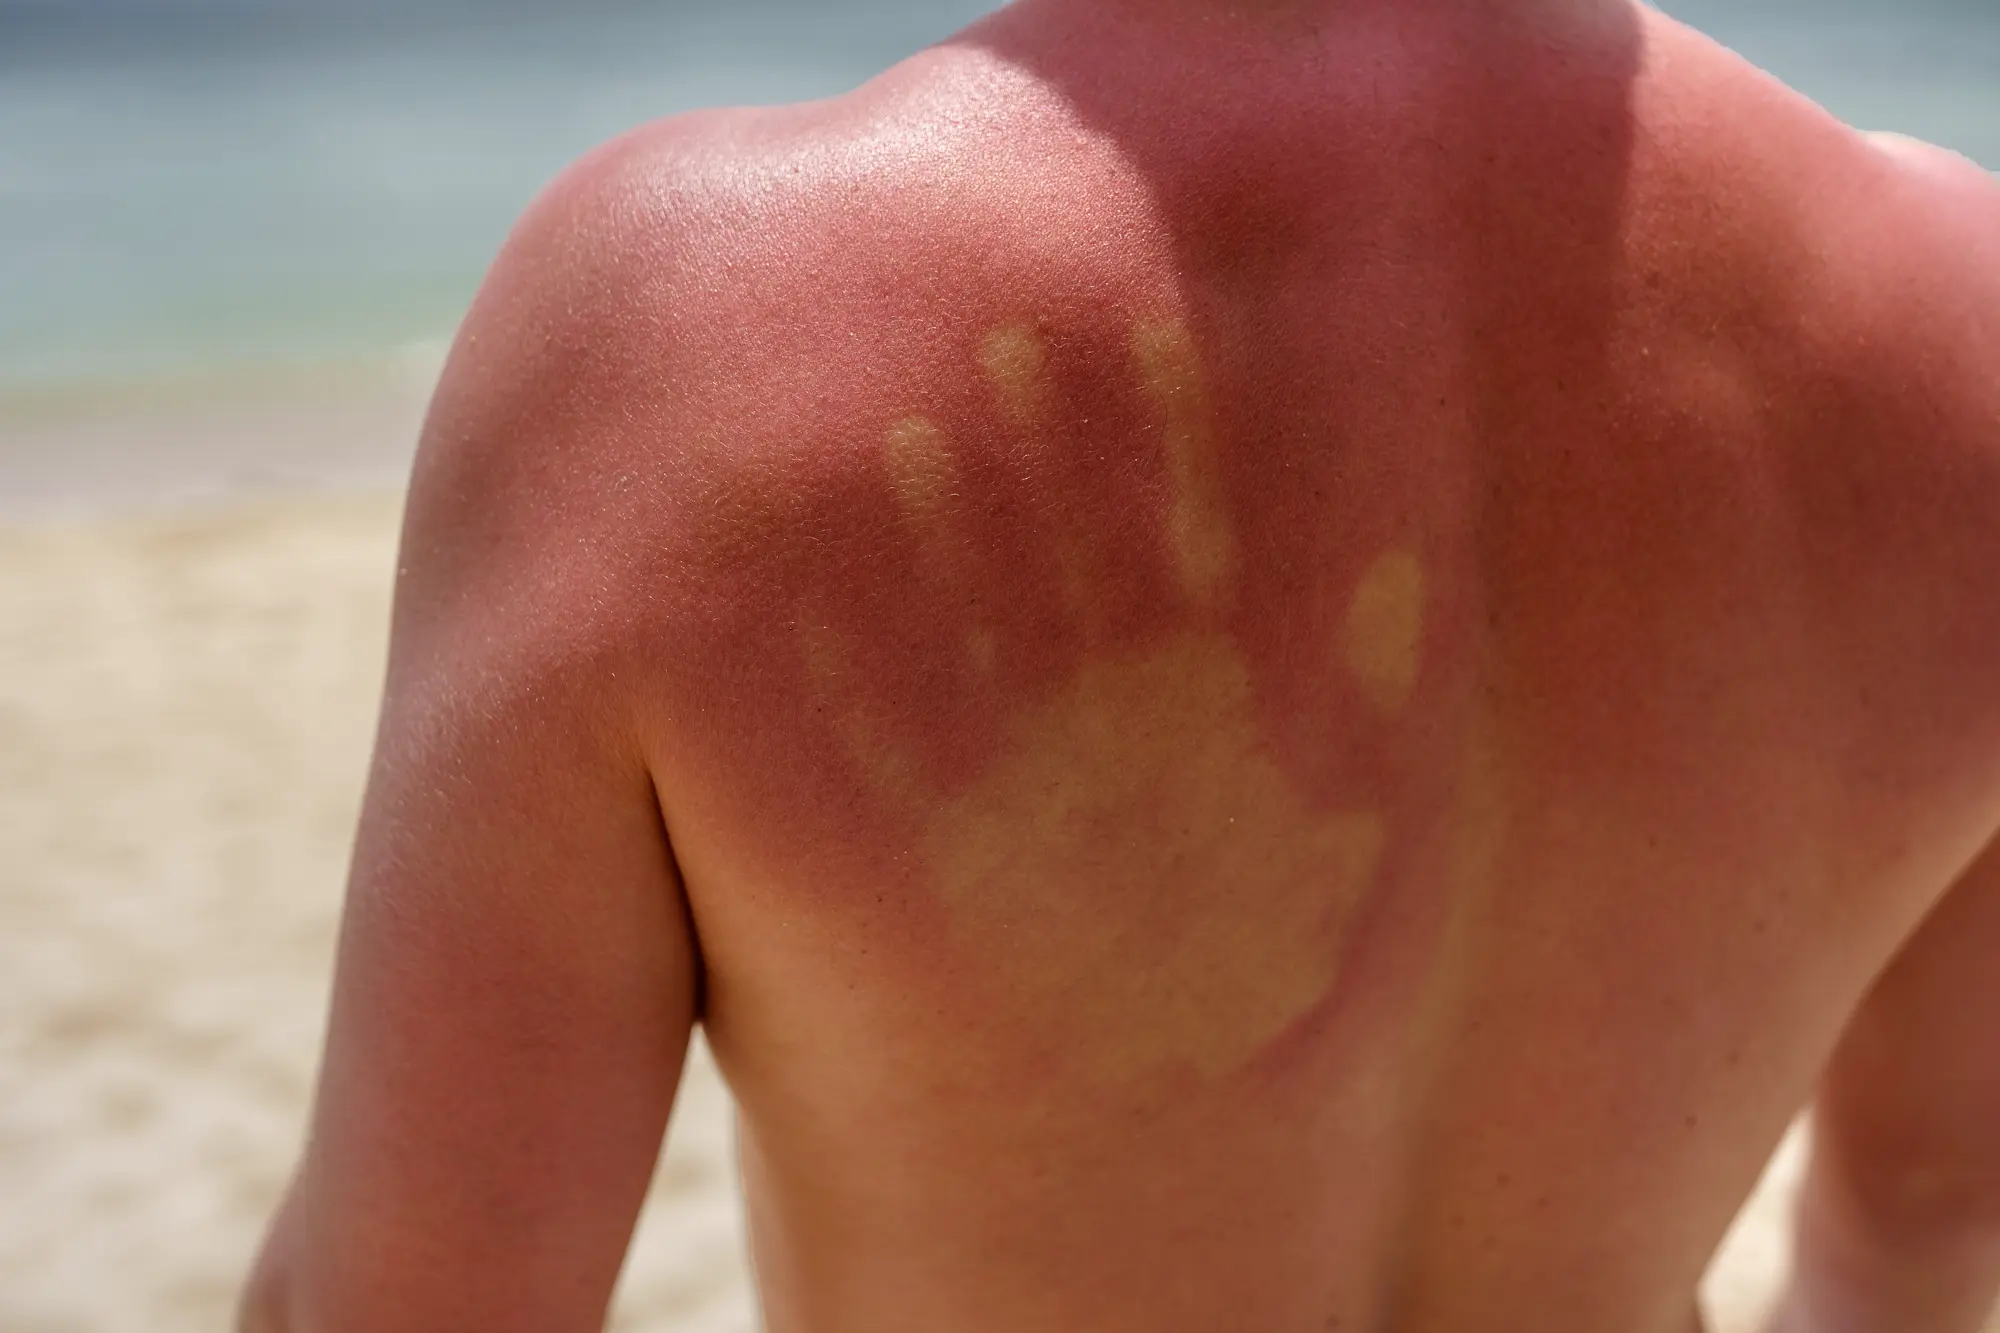 Heal sunburn with natural products